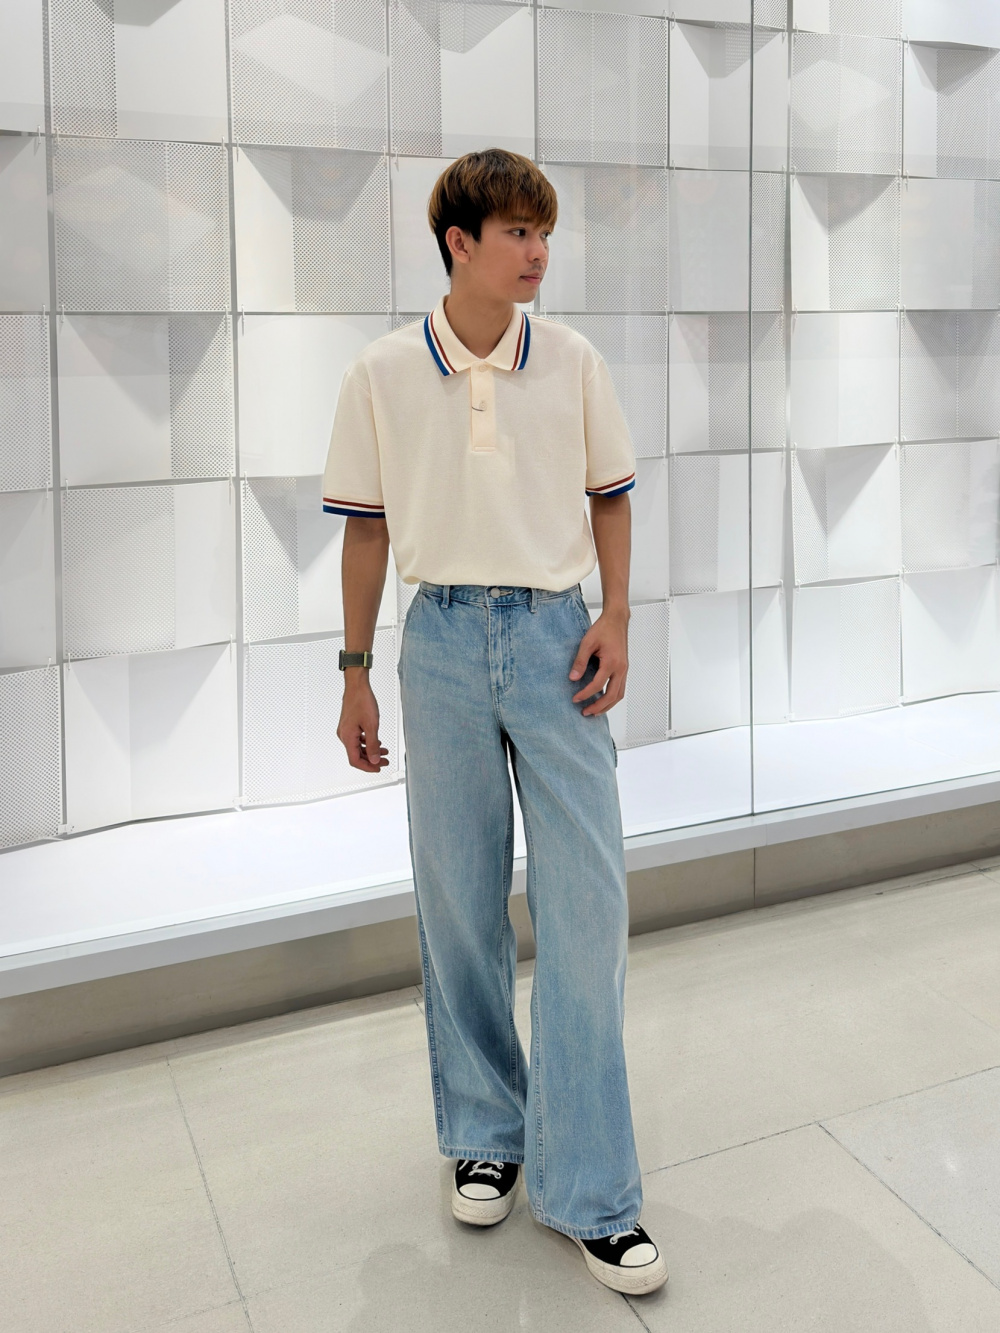 Check styling ideas for「JW Anderson Dry Pique Short Sleeve Polo  (Patterned)、JW Anderson Relaxed Painter Pants」